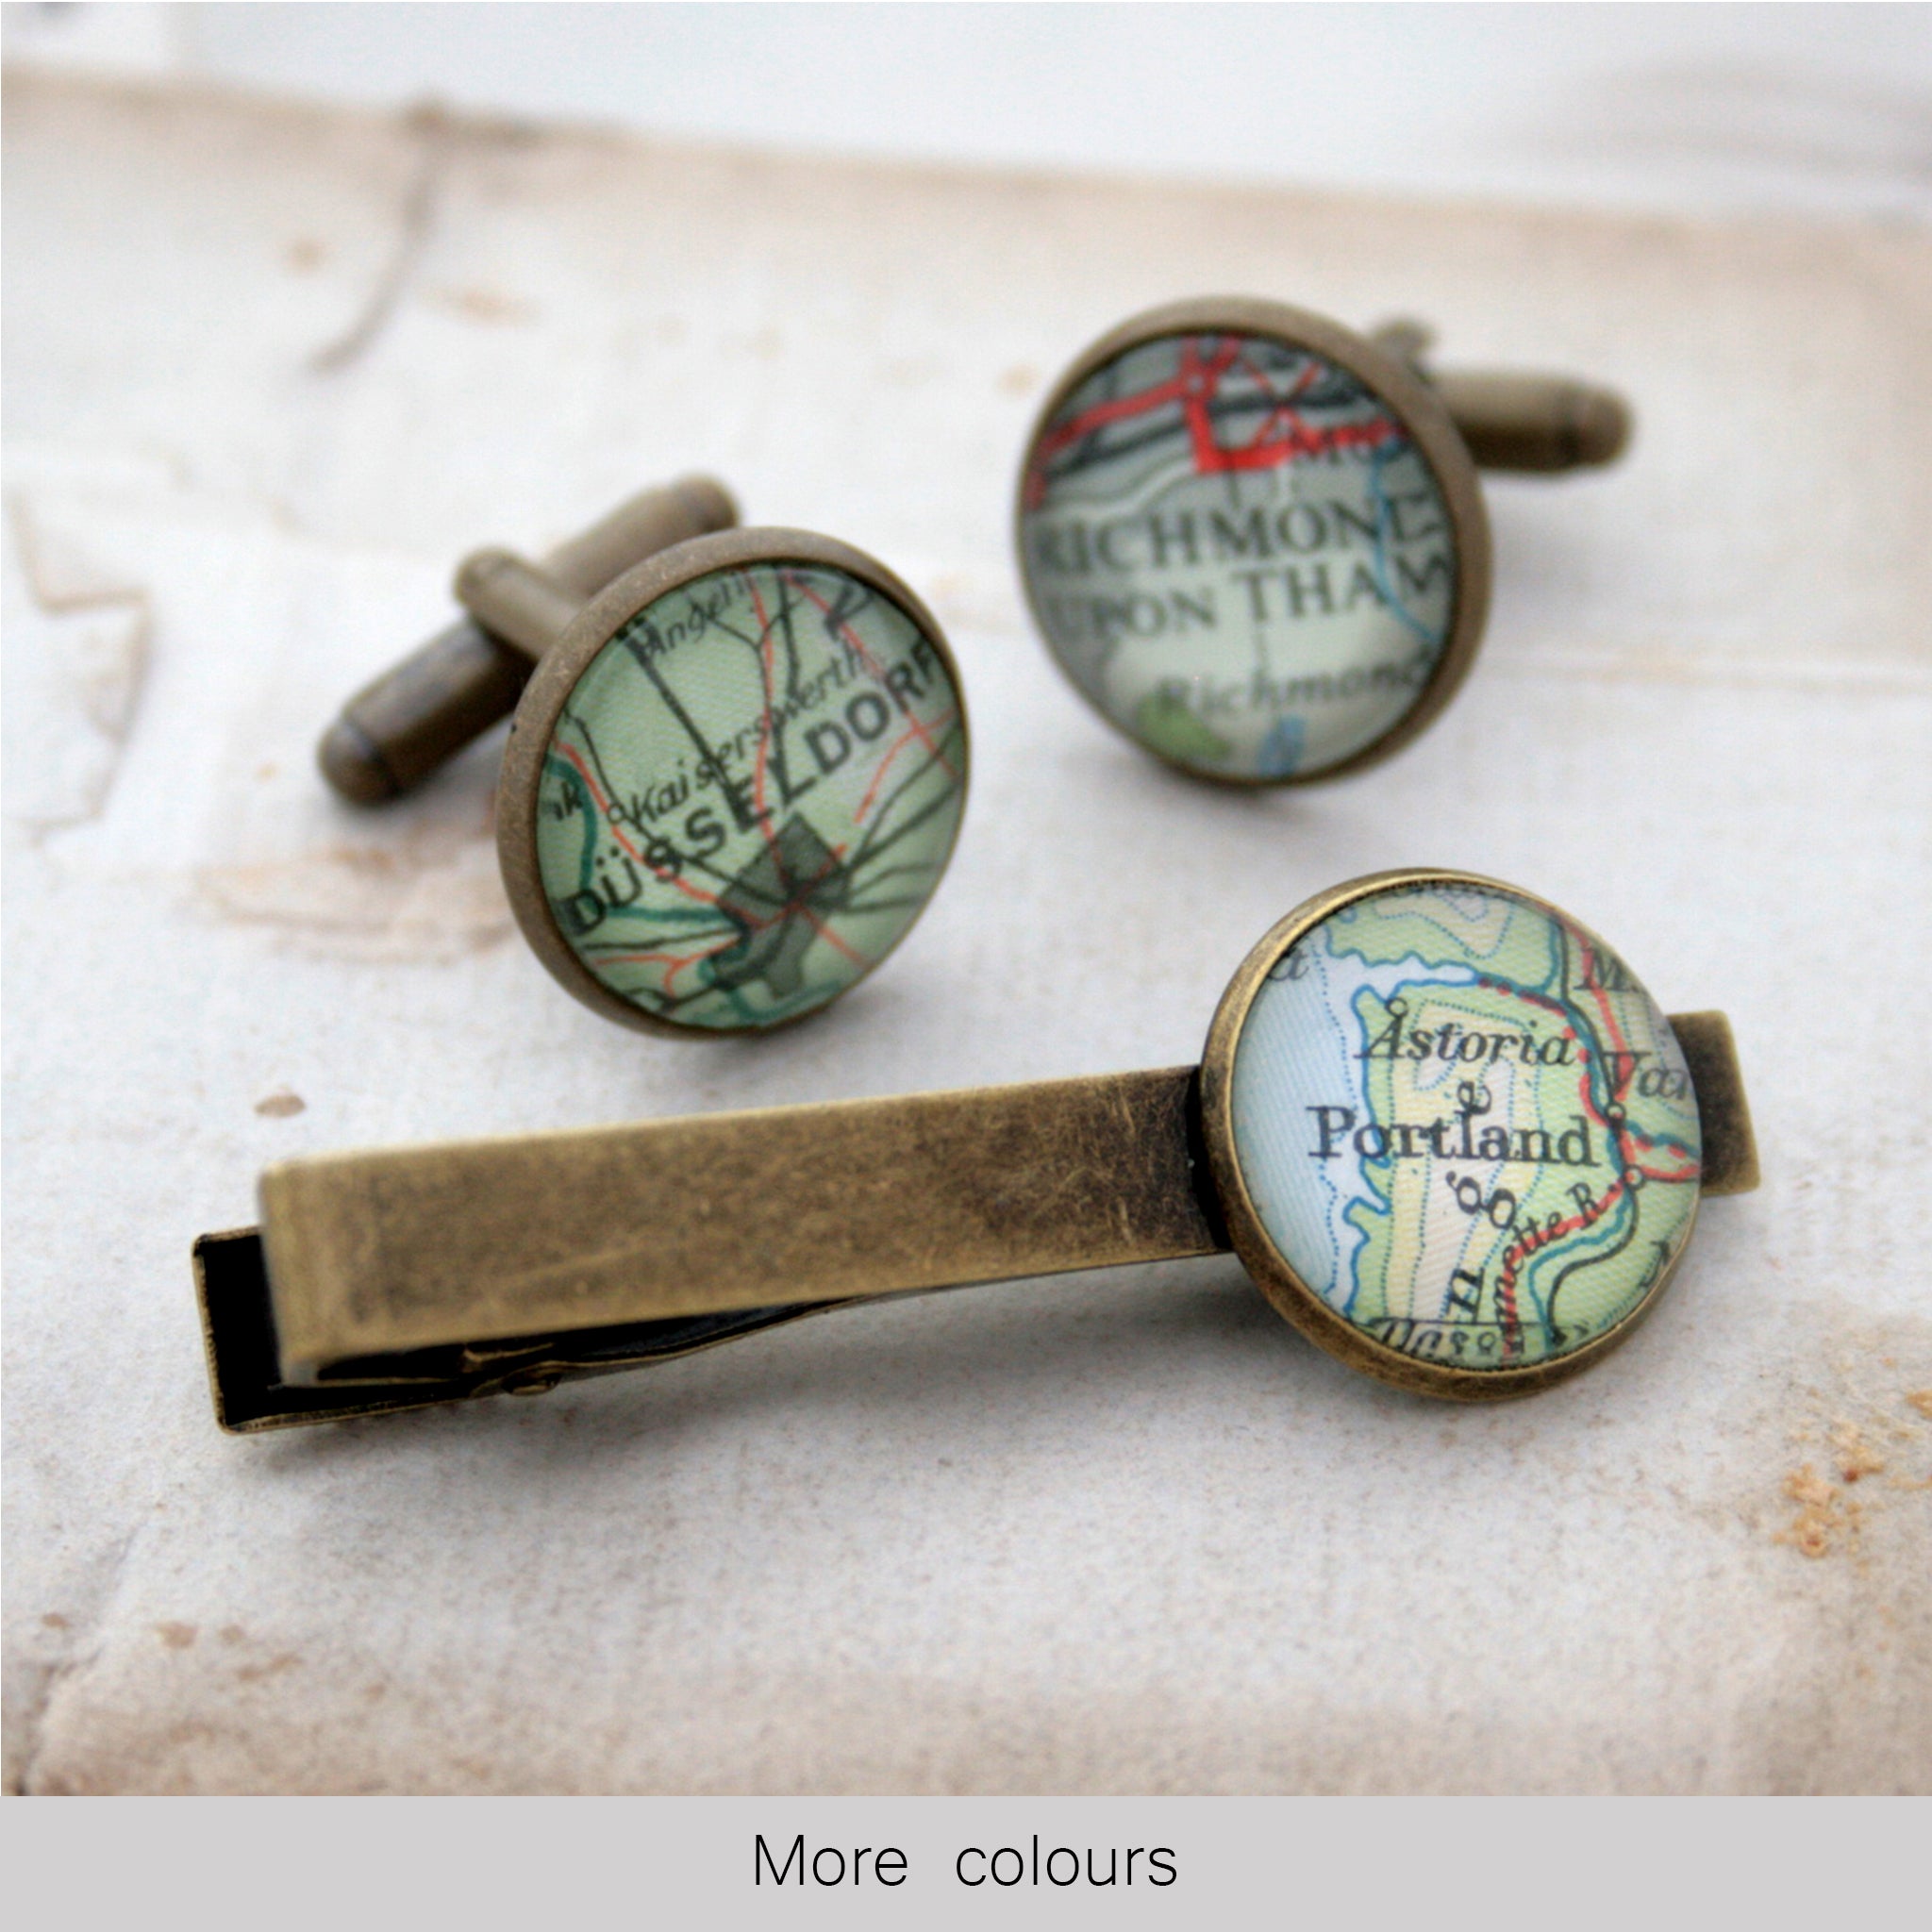 Tie clip and cufflinks in bronze color featuring selection of map locations